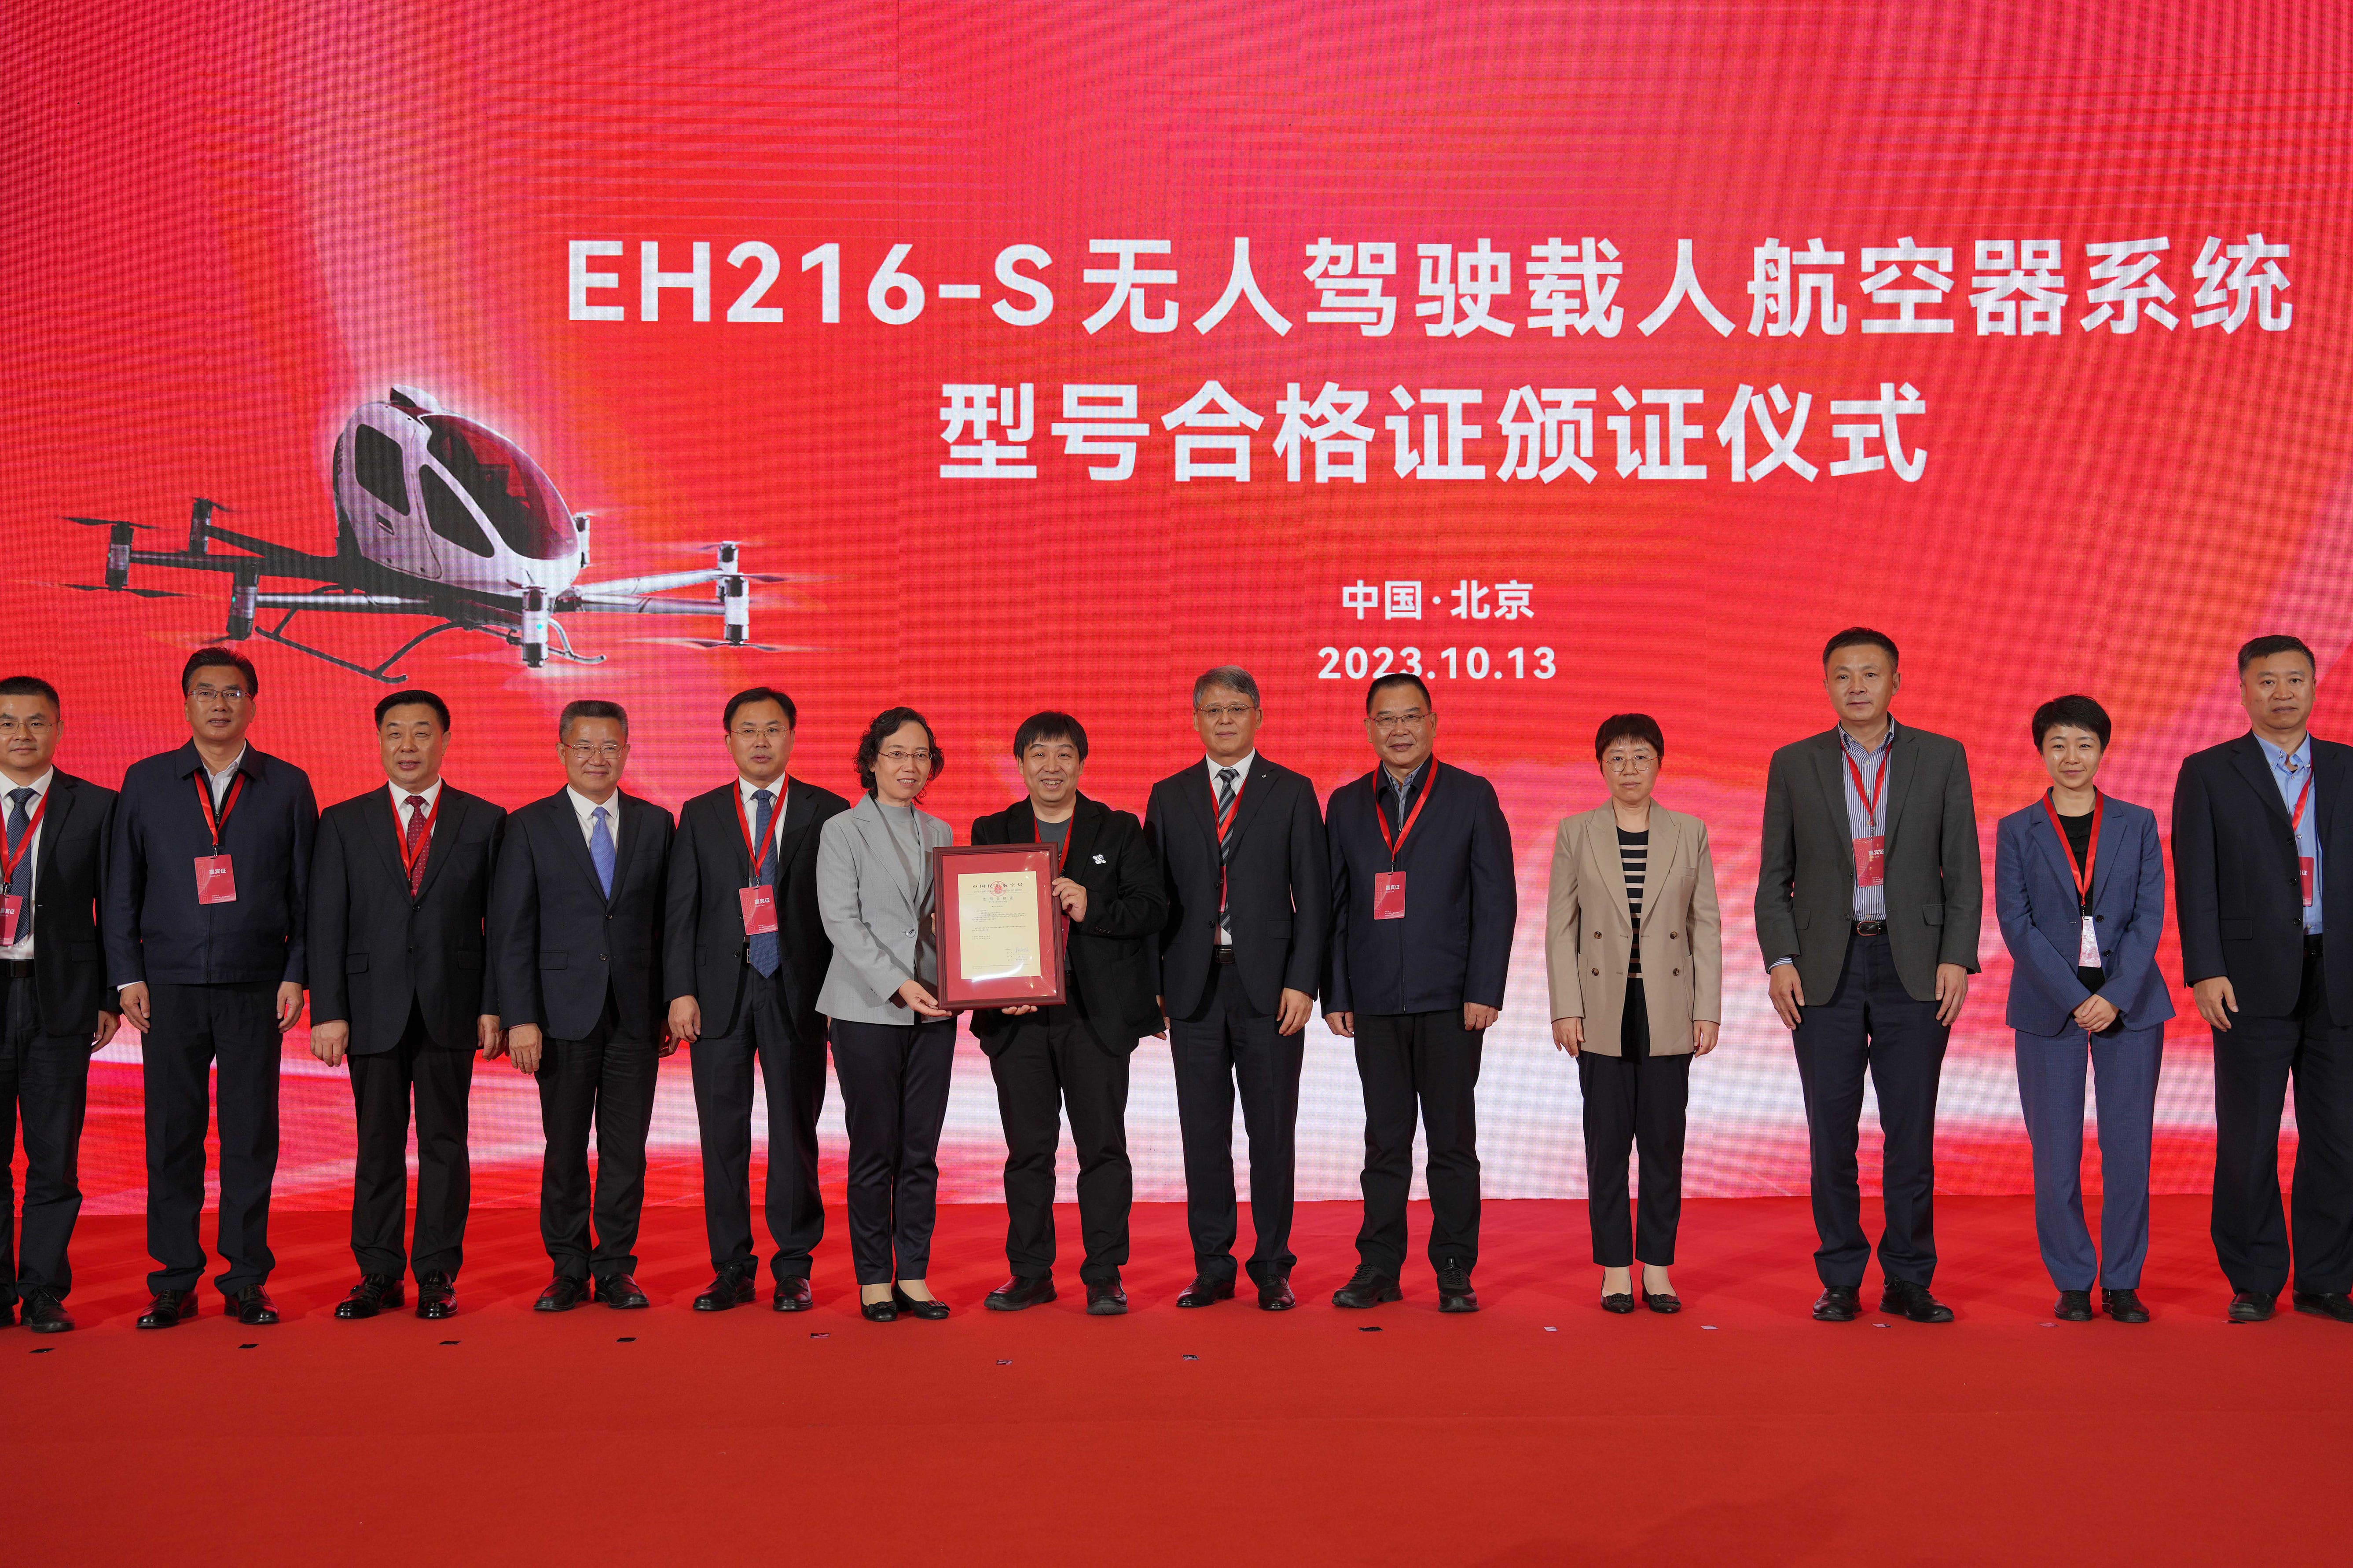 CAAC Issued the EH216-S Type Certificate to EHang